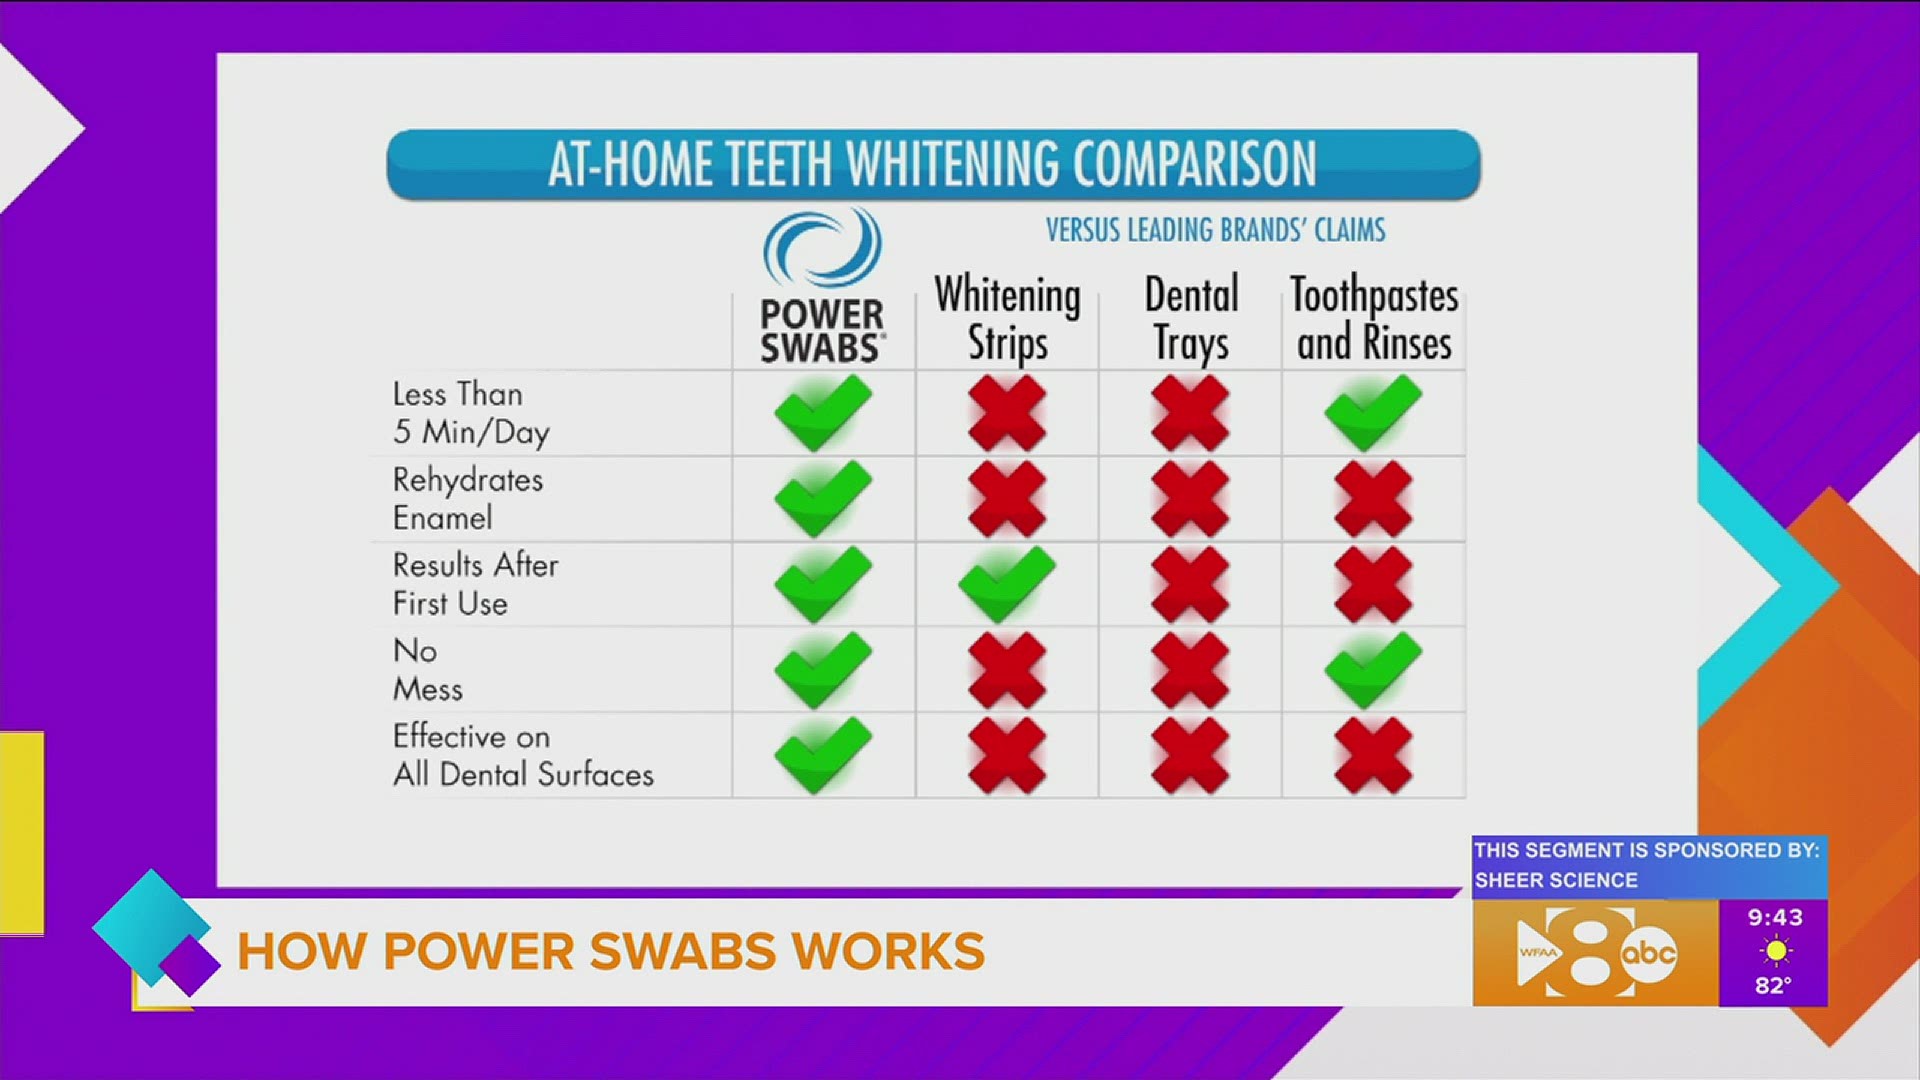 Learn more about what Power Swabs